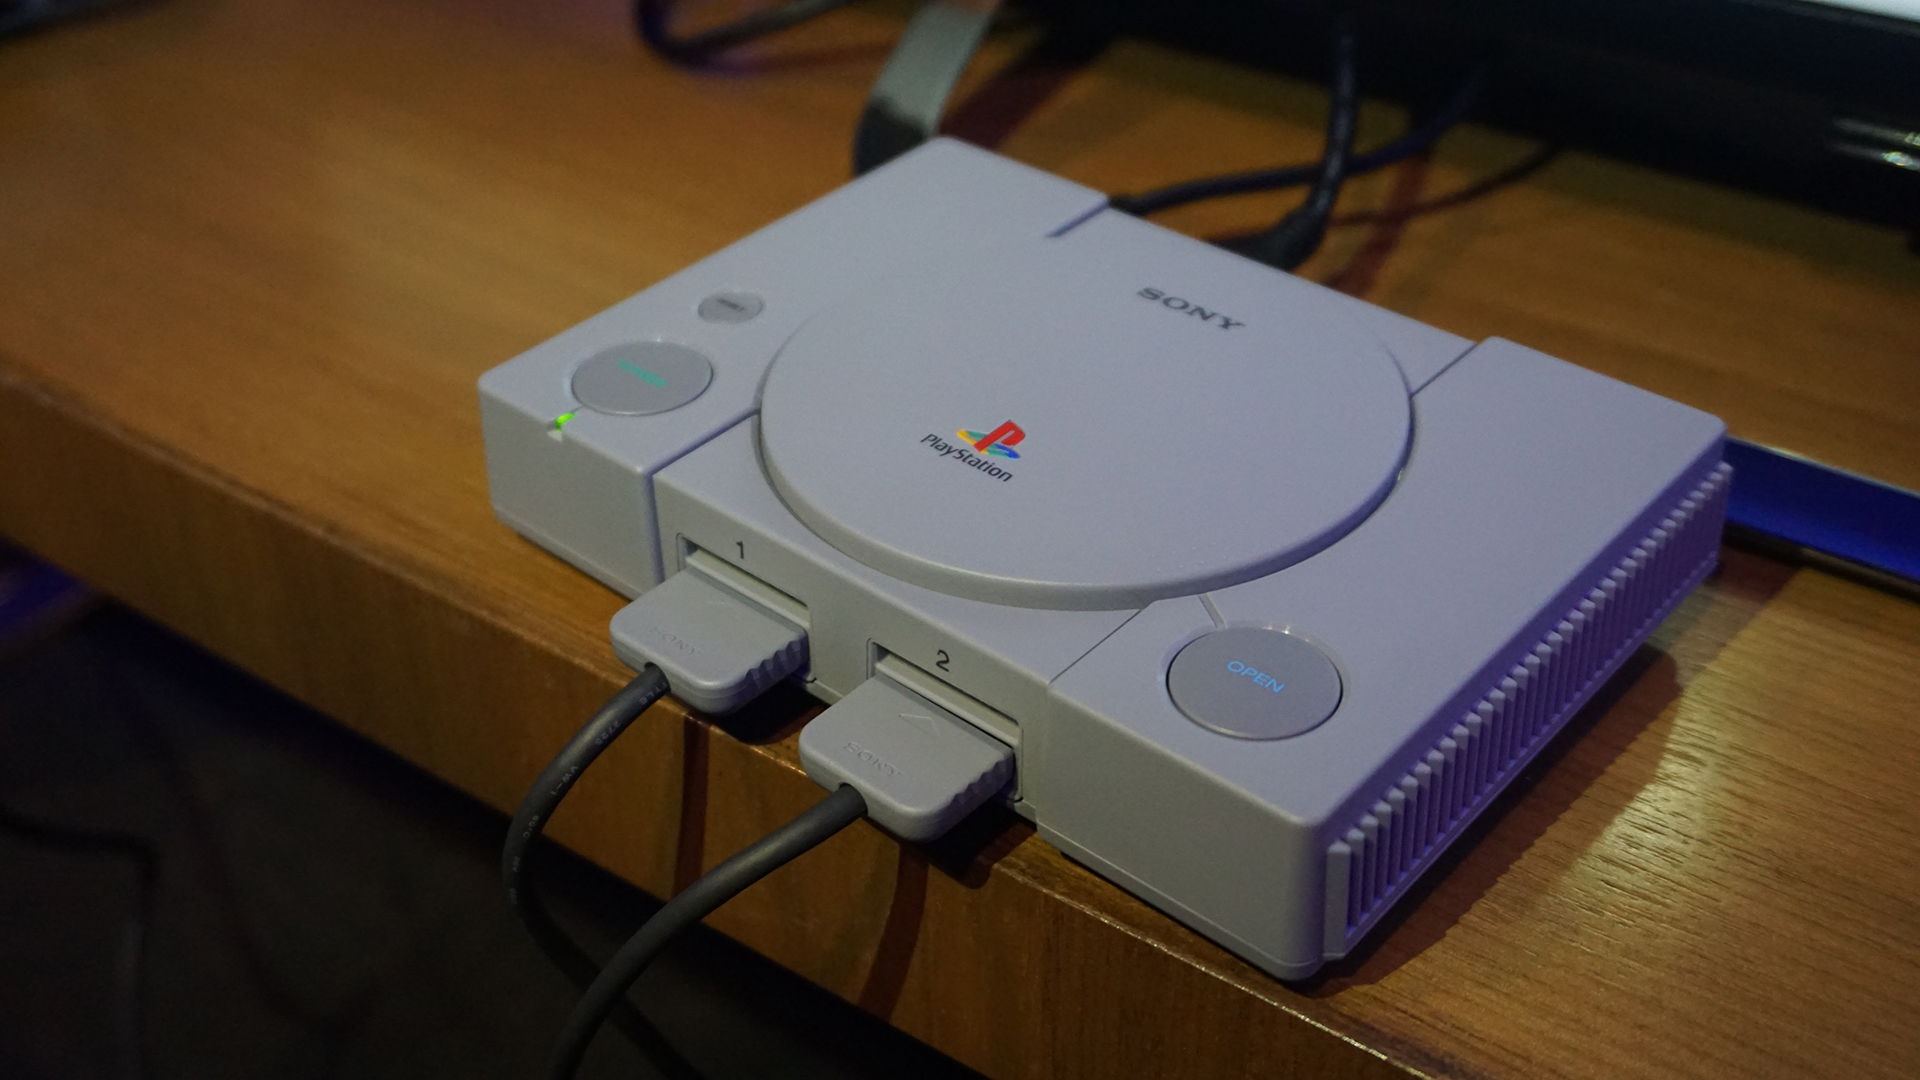 Sony PlayStation Classic review: A fine line between classic and